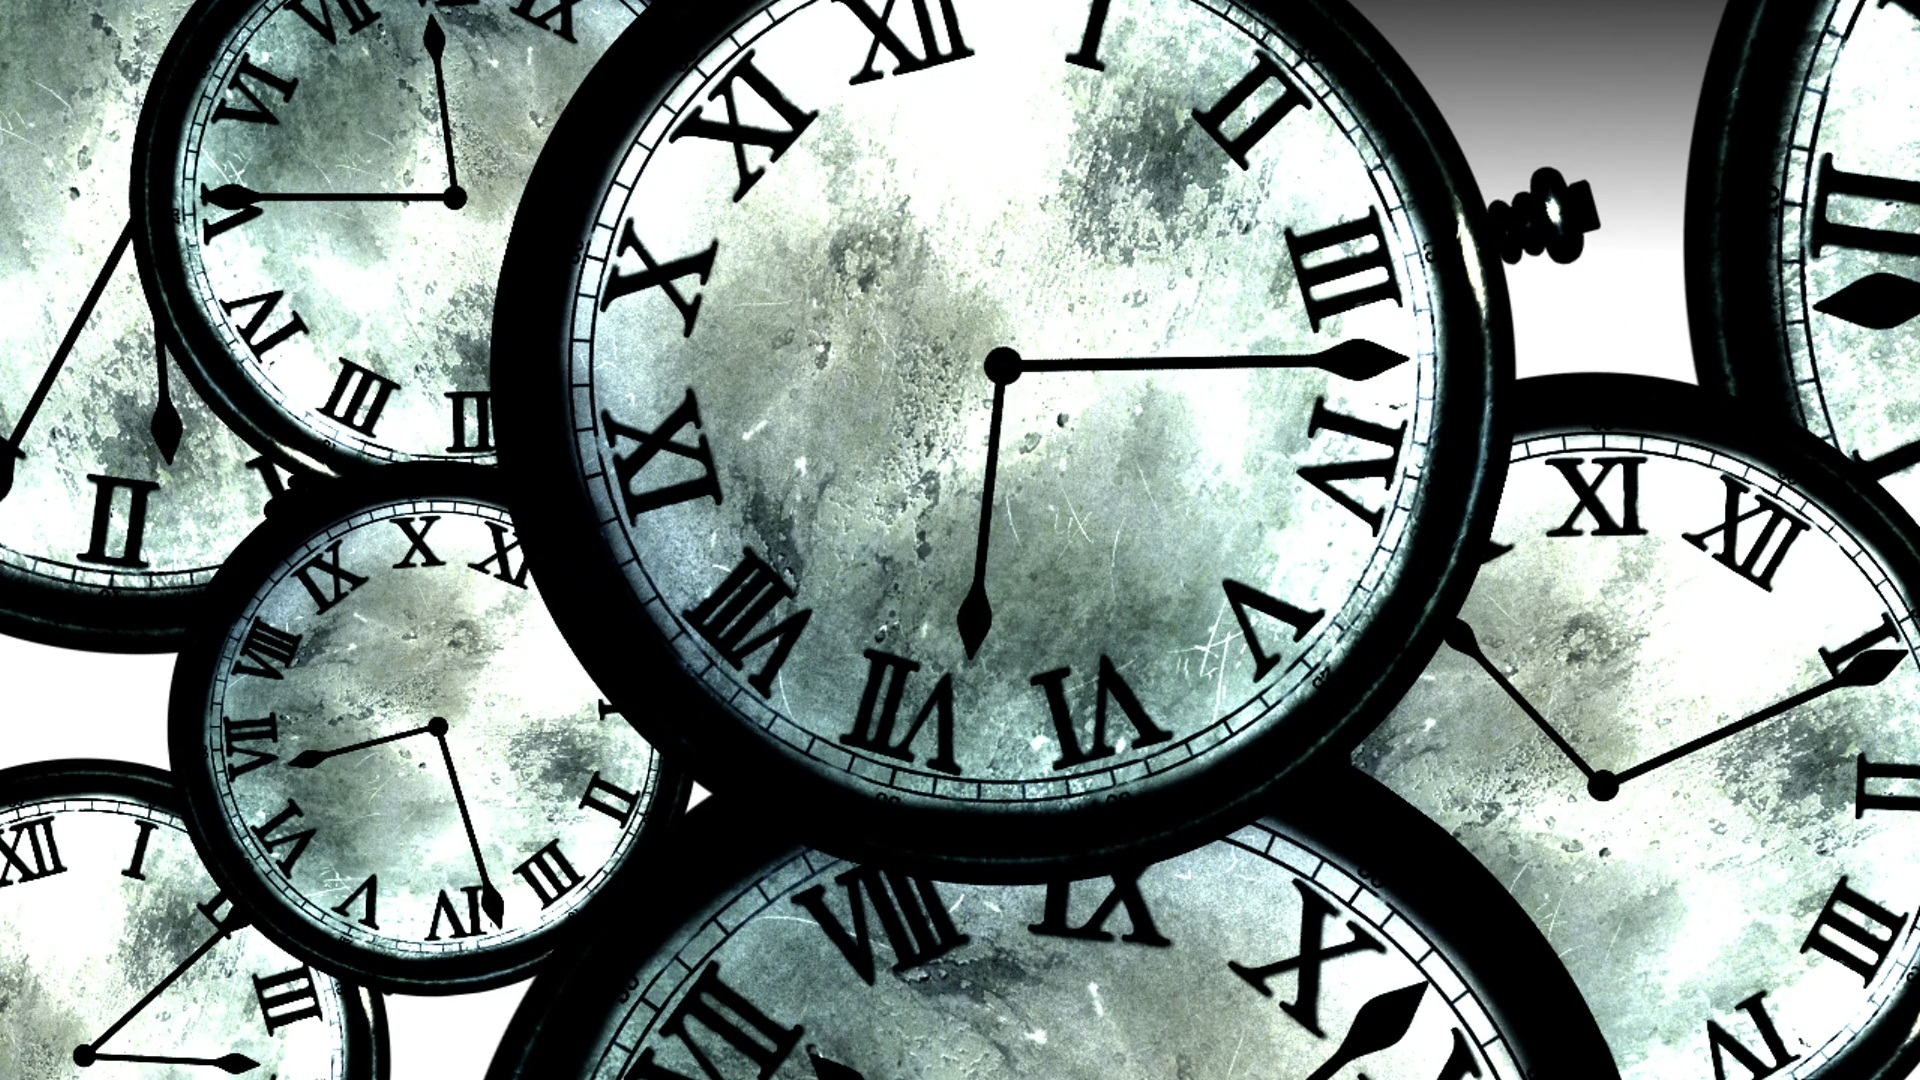 12 Ways To Use Your Time, Now That Daylight Savings Has Ended